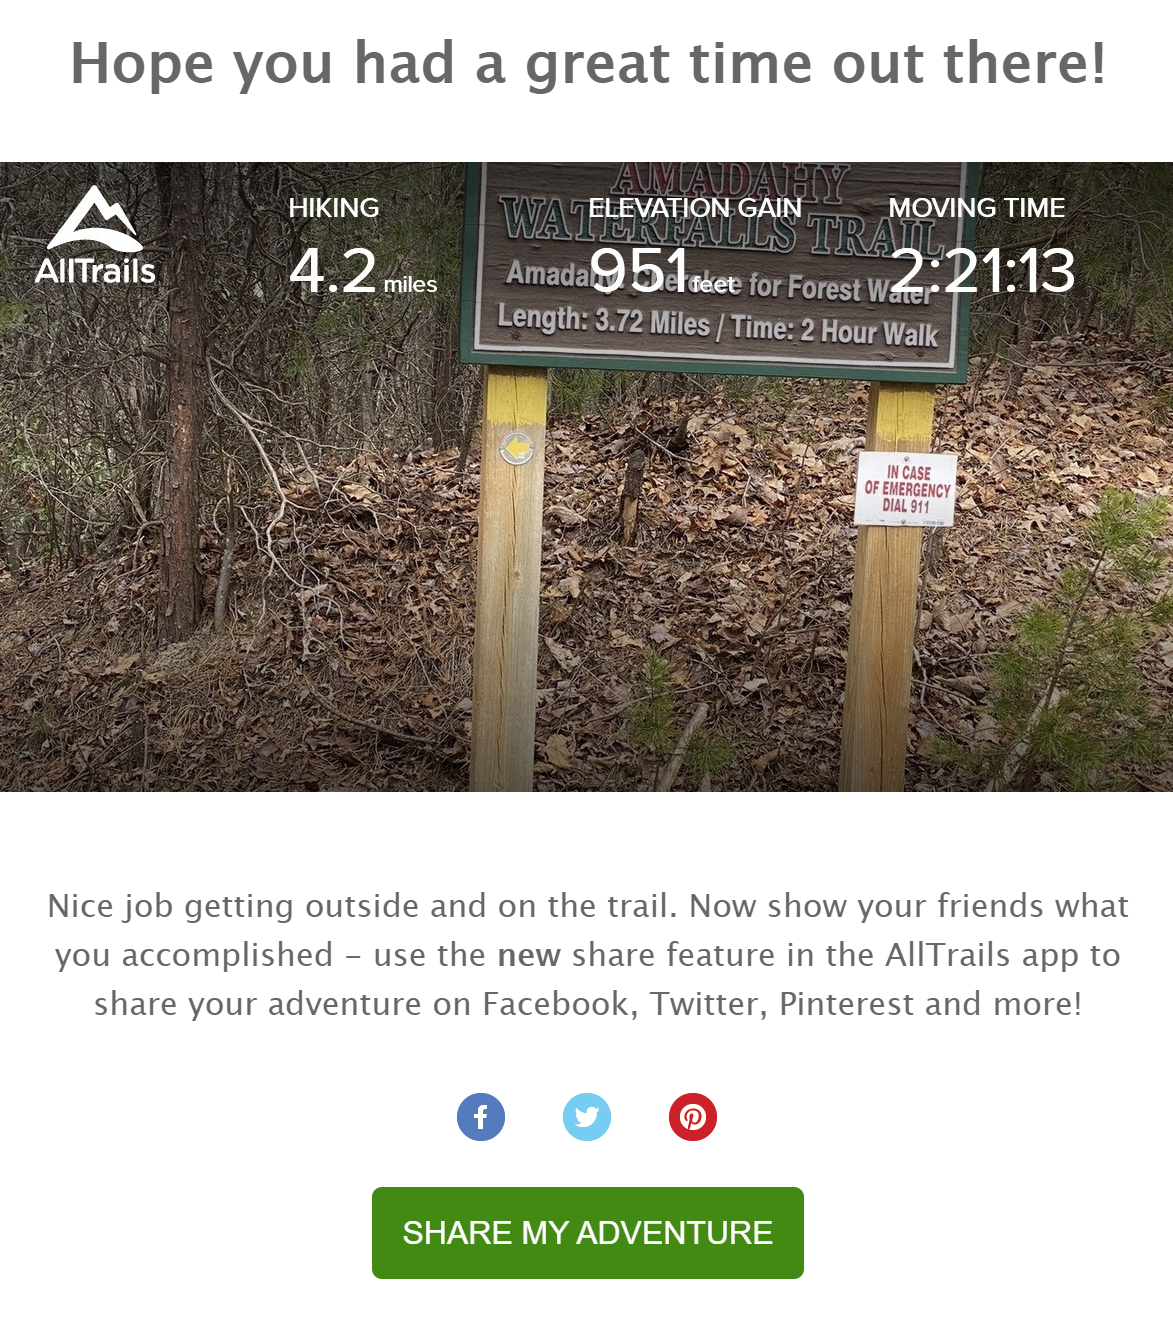 An email from AllTrails summarizing my walk while using the app. They also ask me to share my experience on social media. 